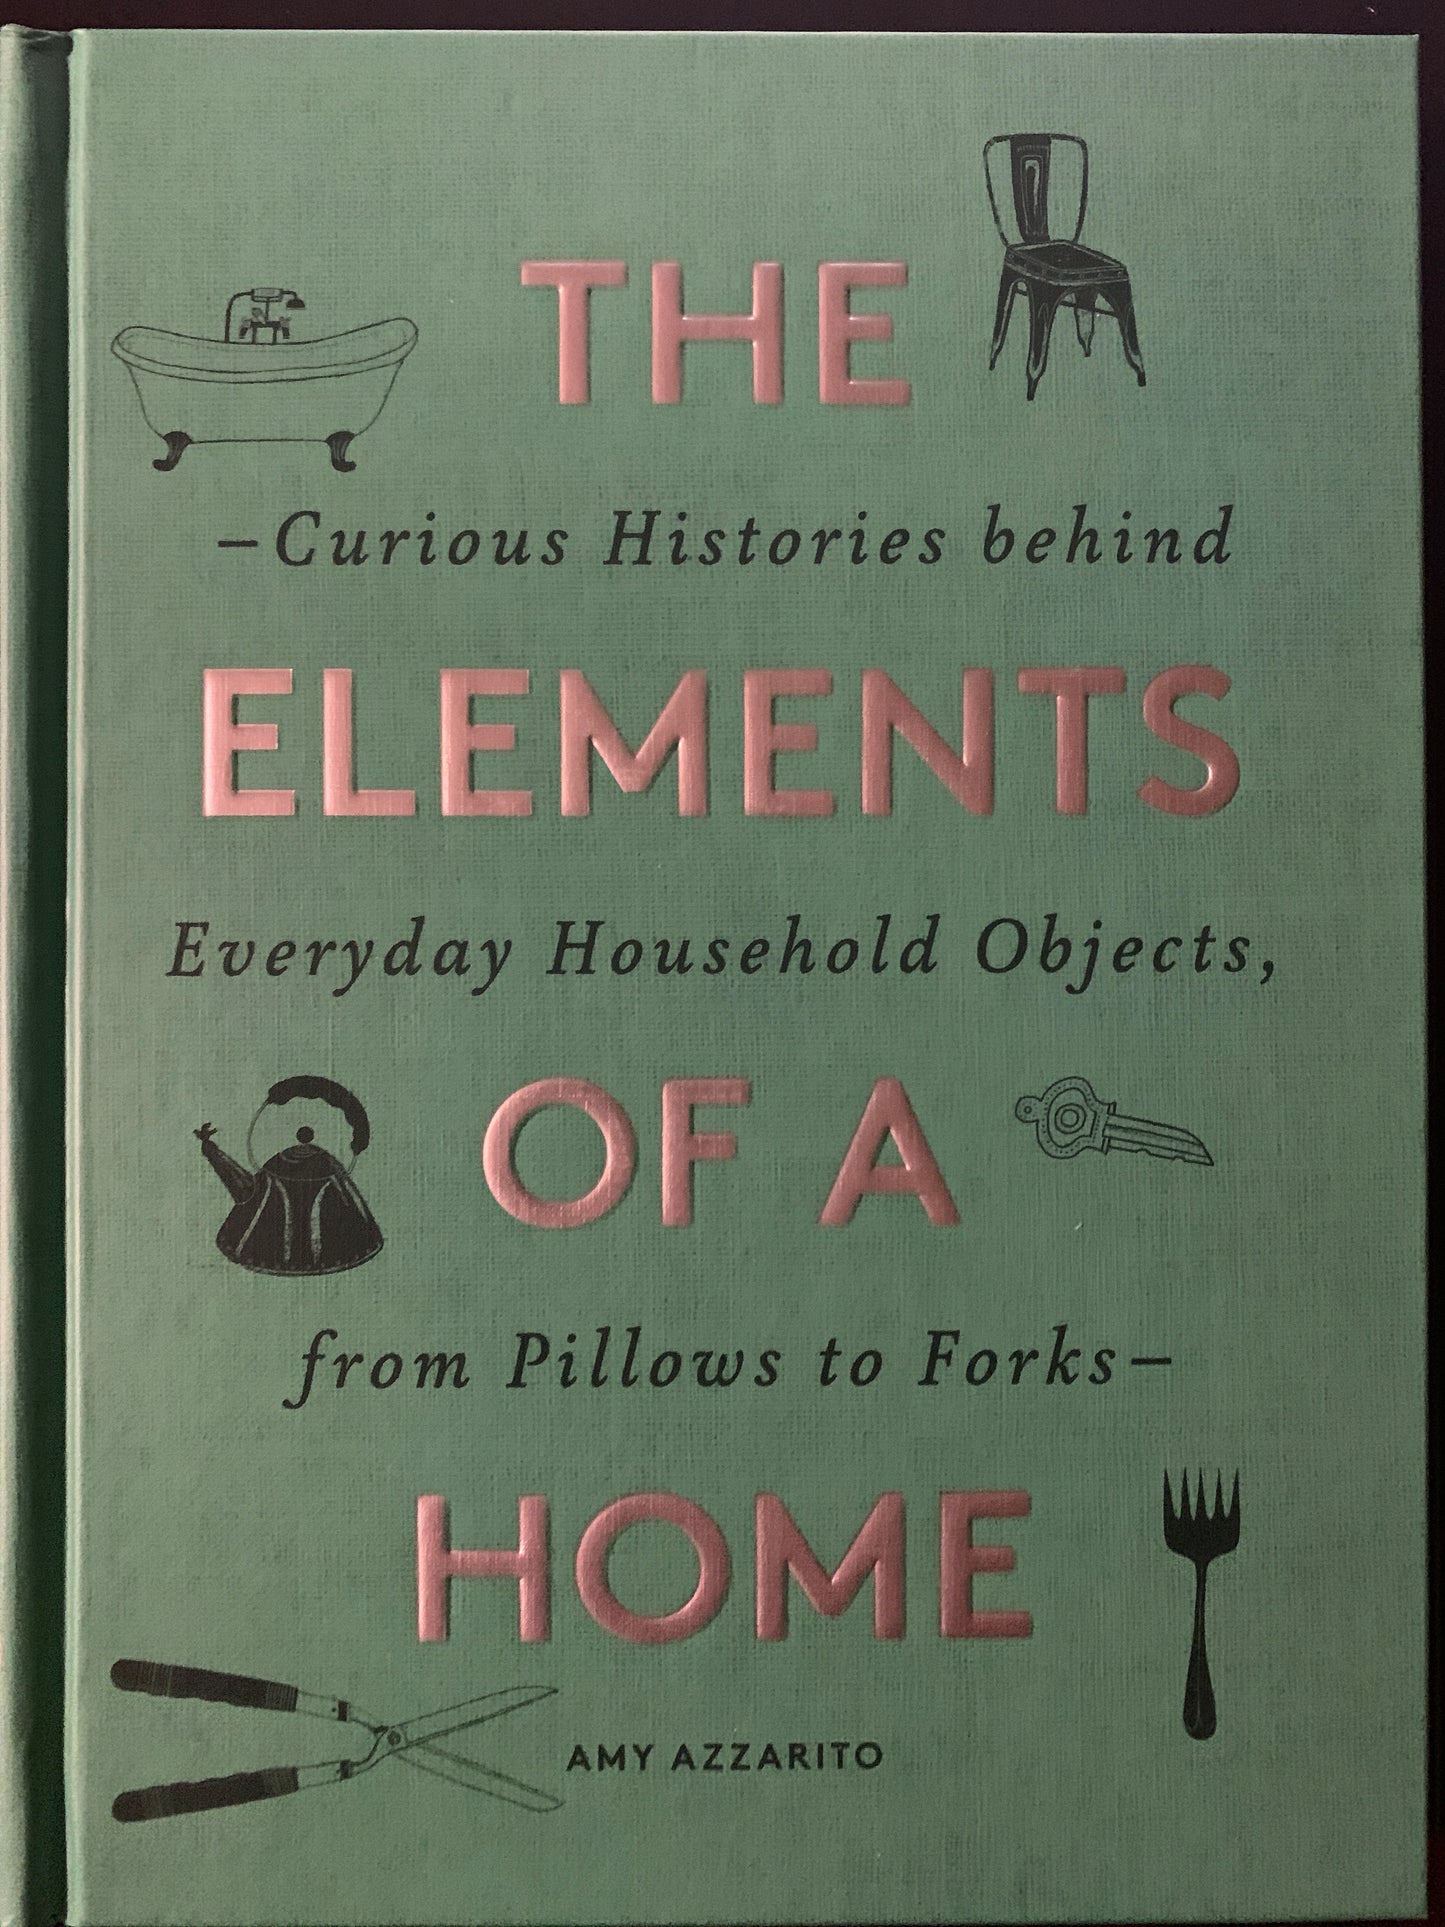 The Elements of a Home